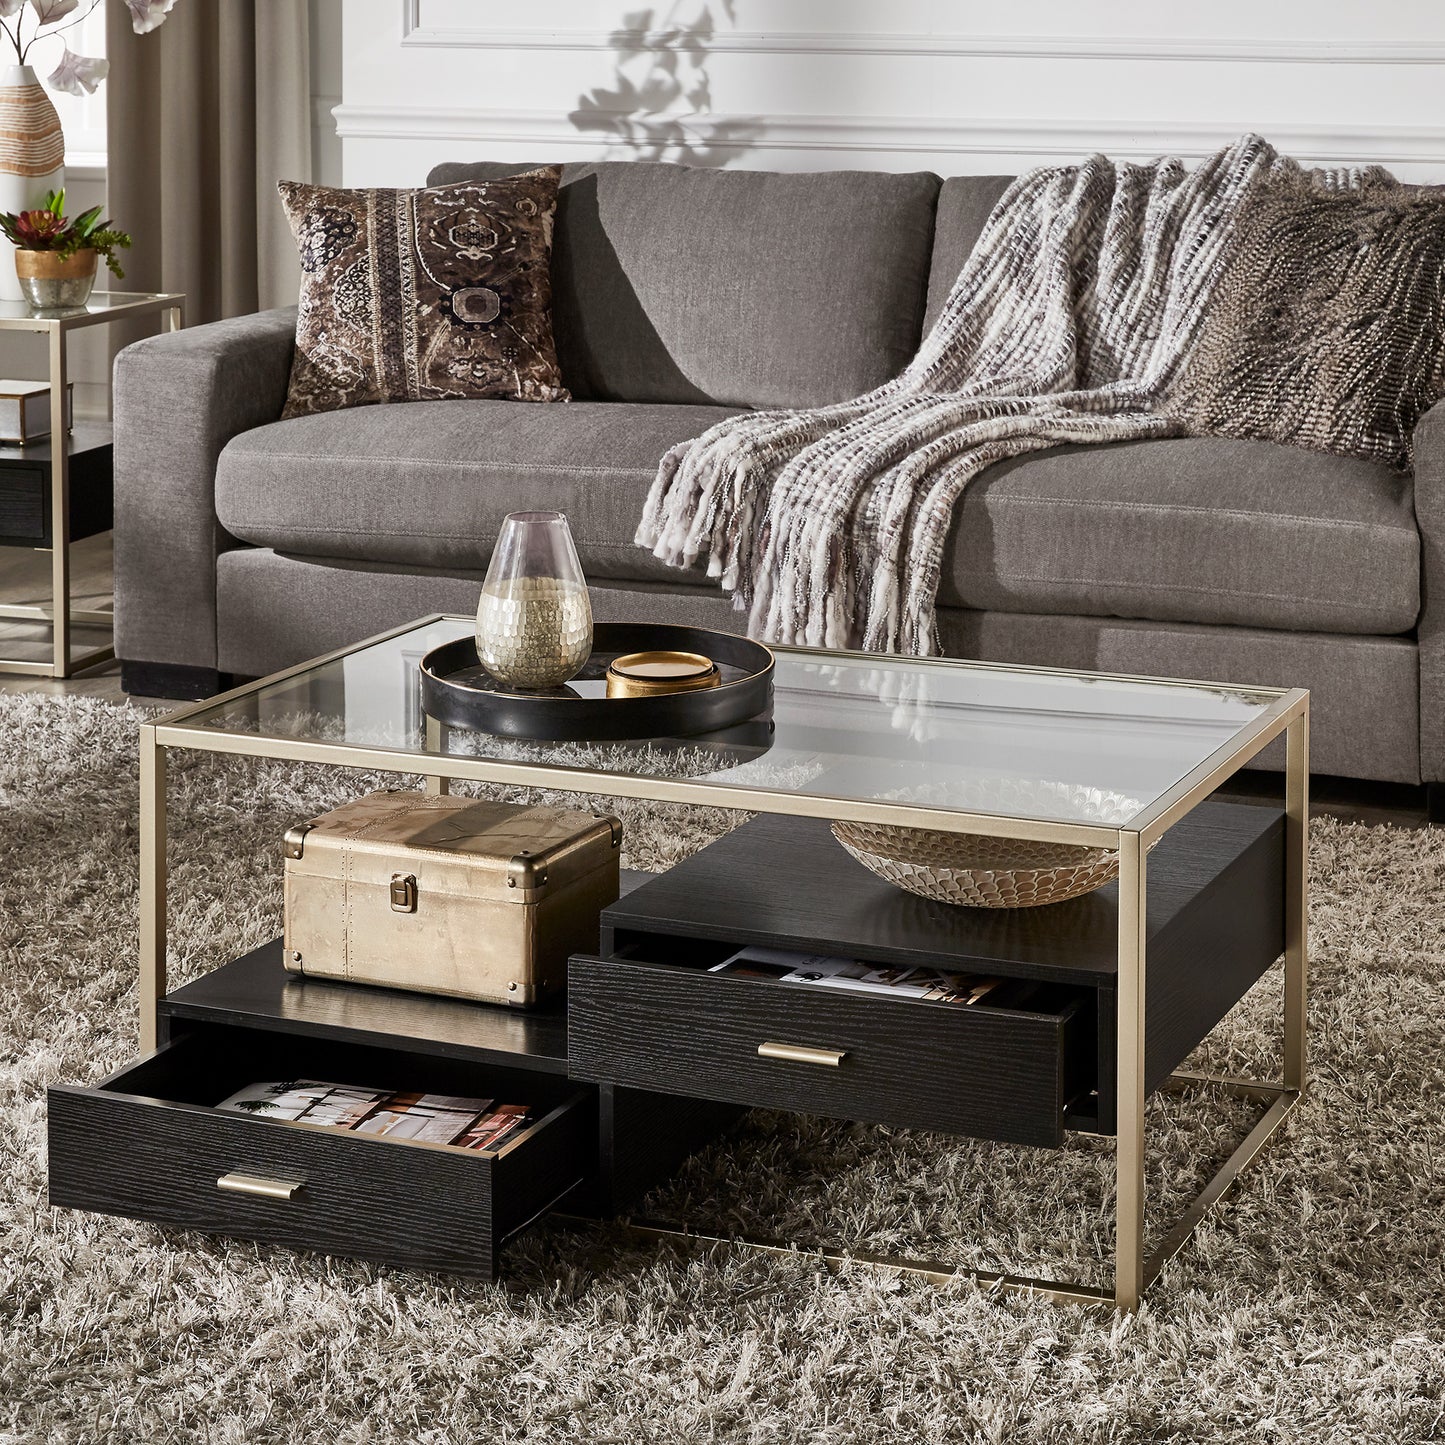 Champagne Silver Finish Table with Storage - Coffee Table